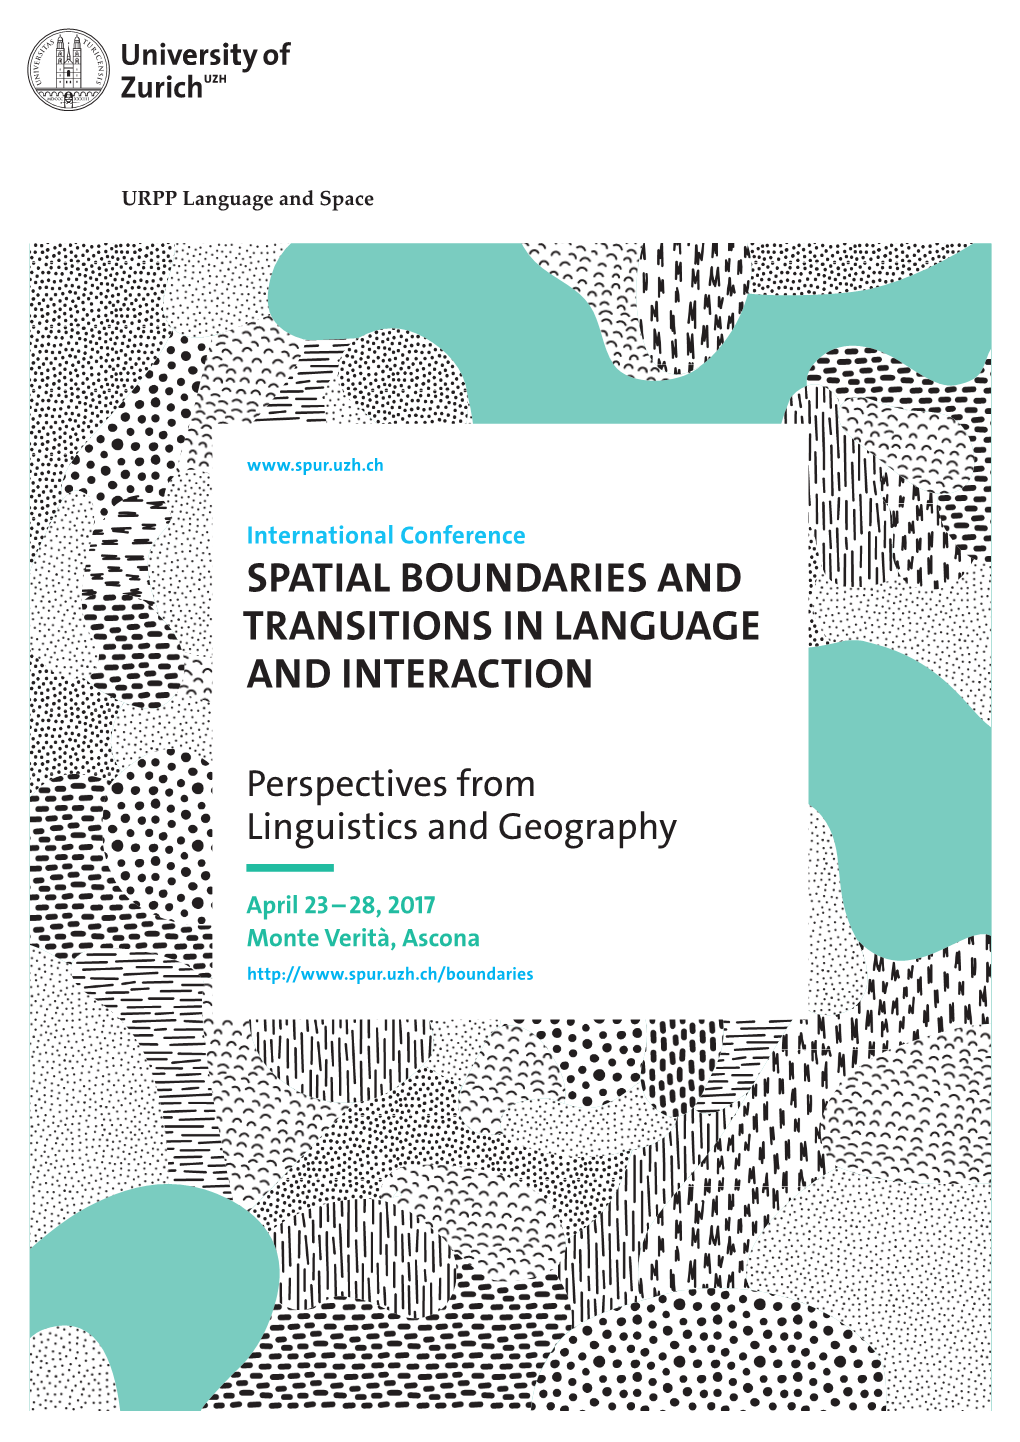 Spatial Boundaries and Transitions in Language and Interaction